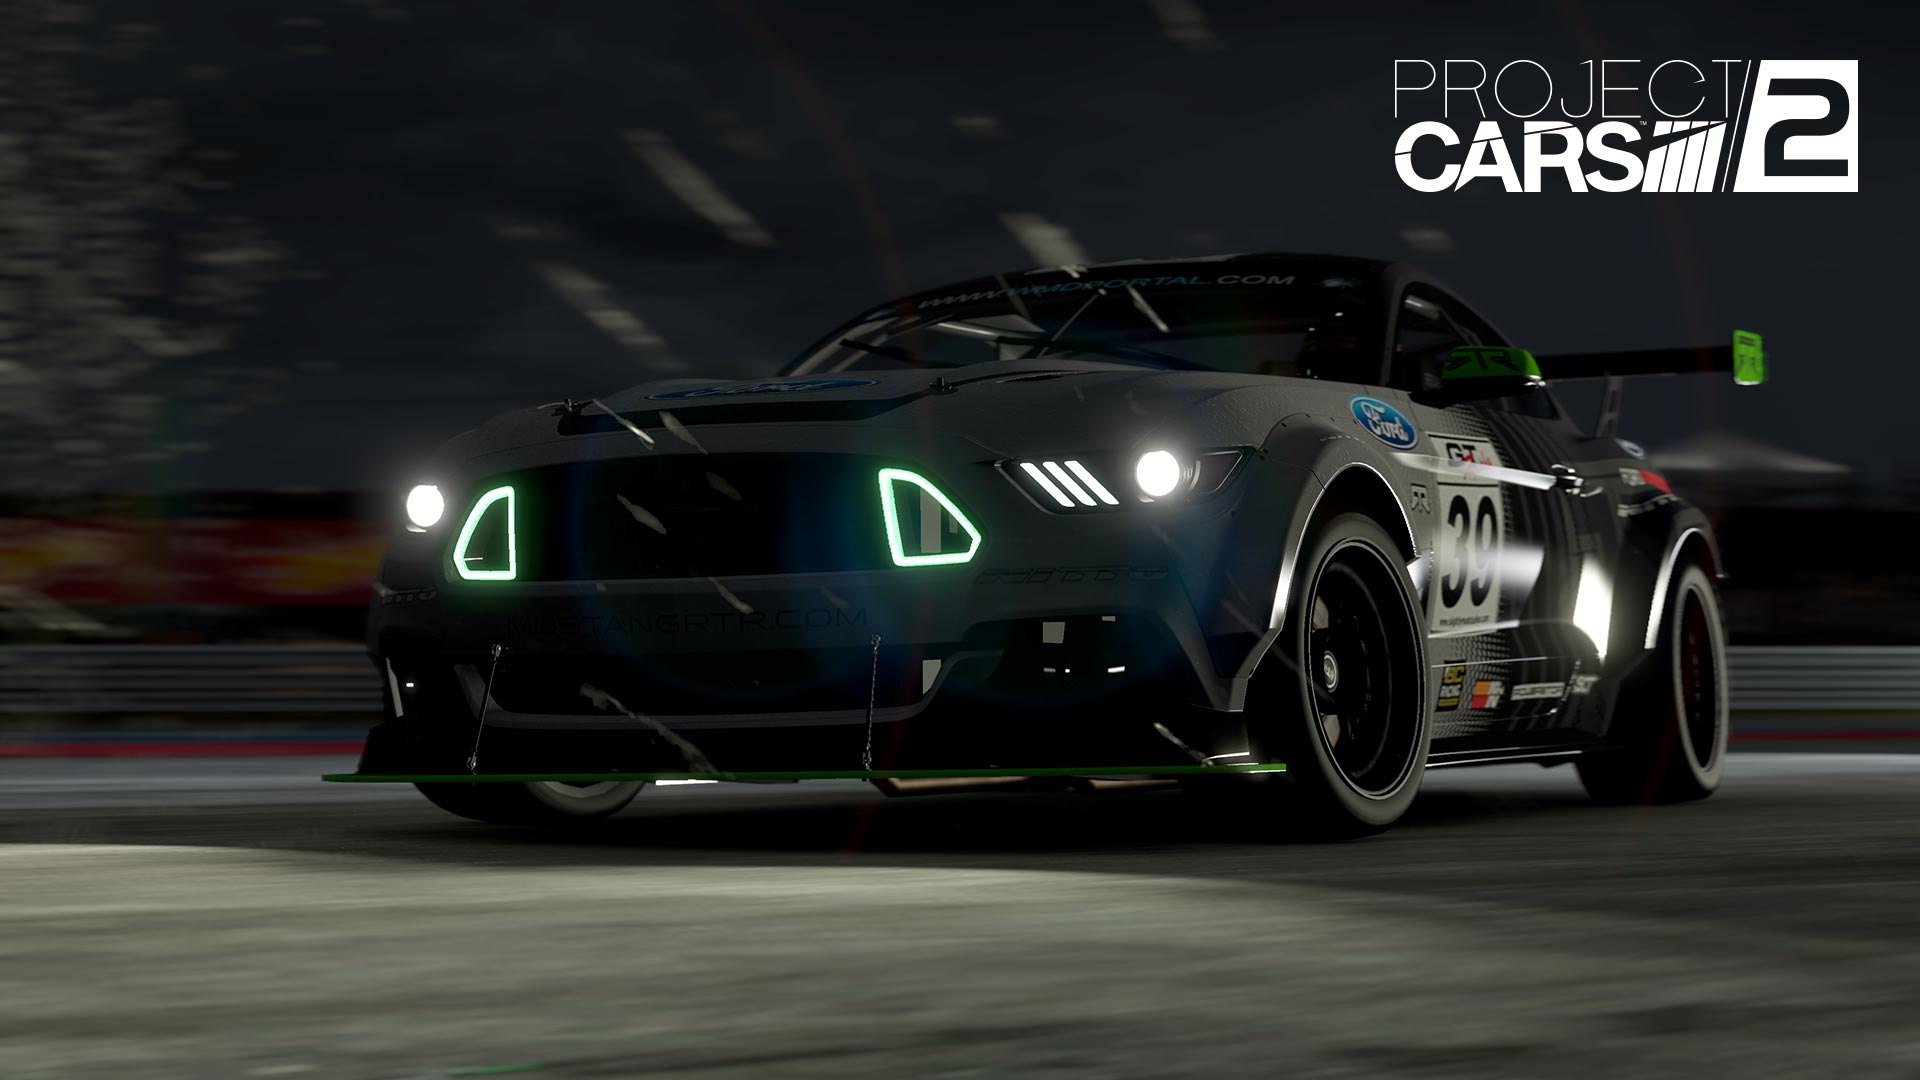 download project cars 3